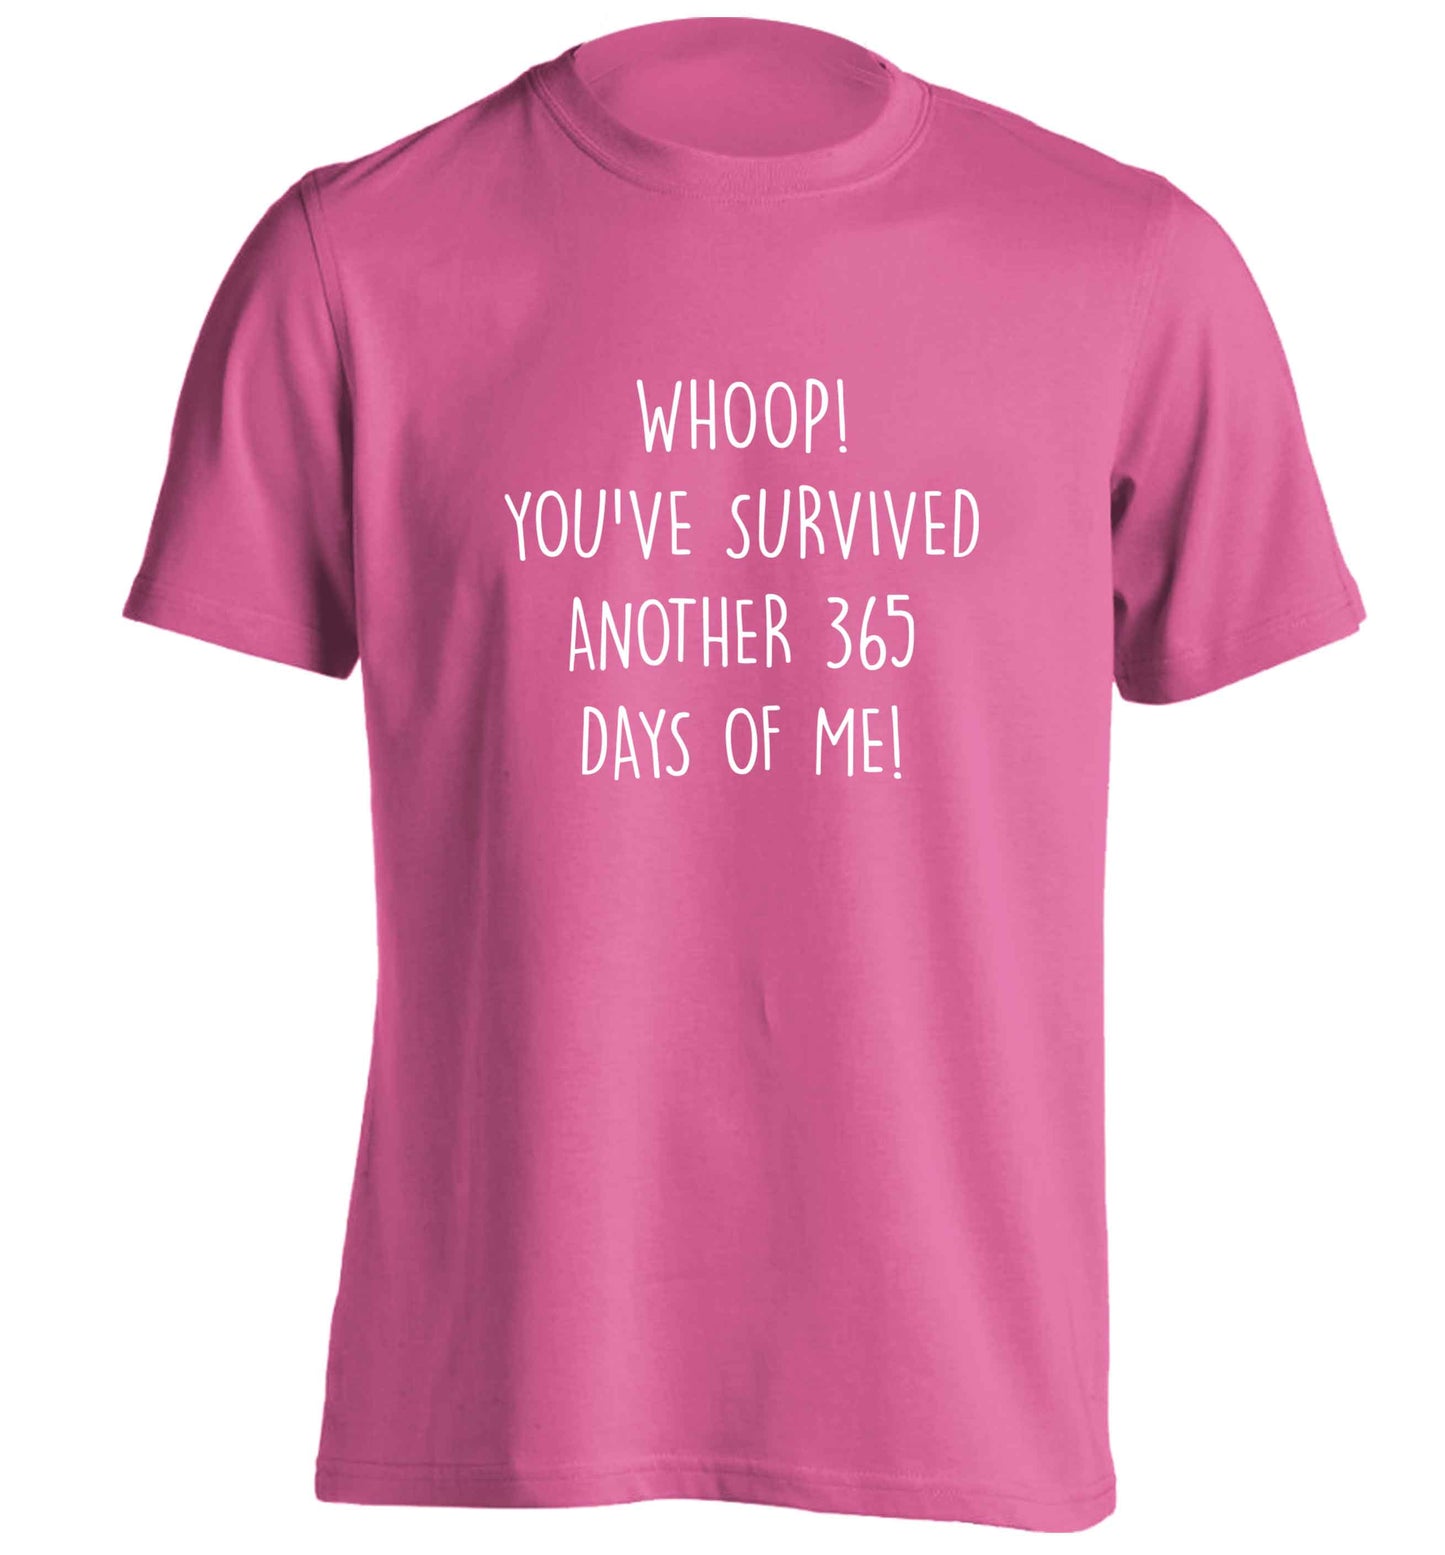 Whoop! You've survived another 365 days with me! adults unisex pink Tshirt 2XL